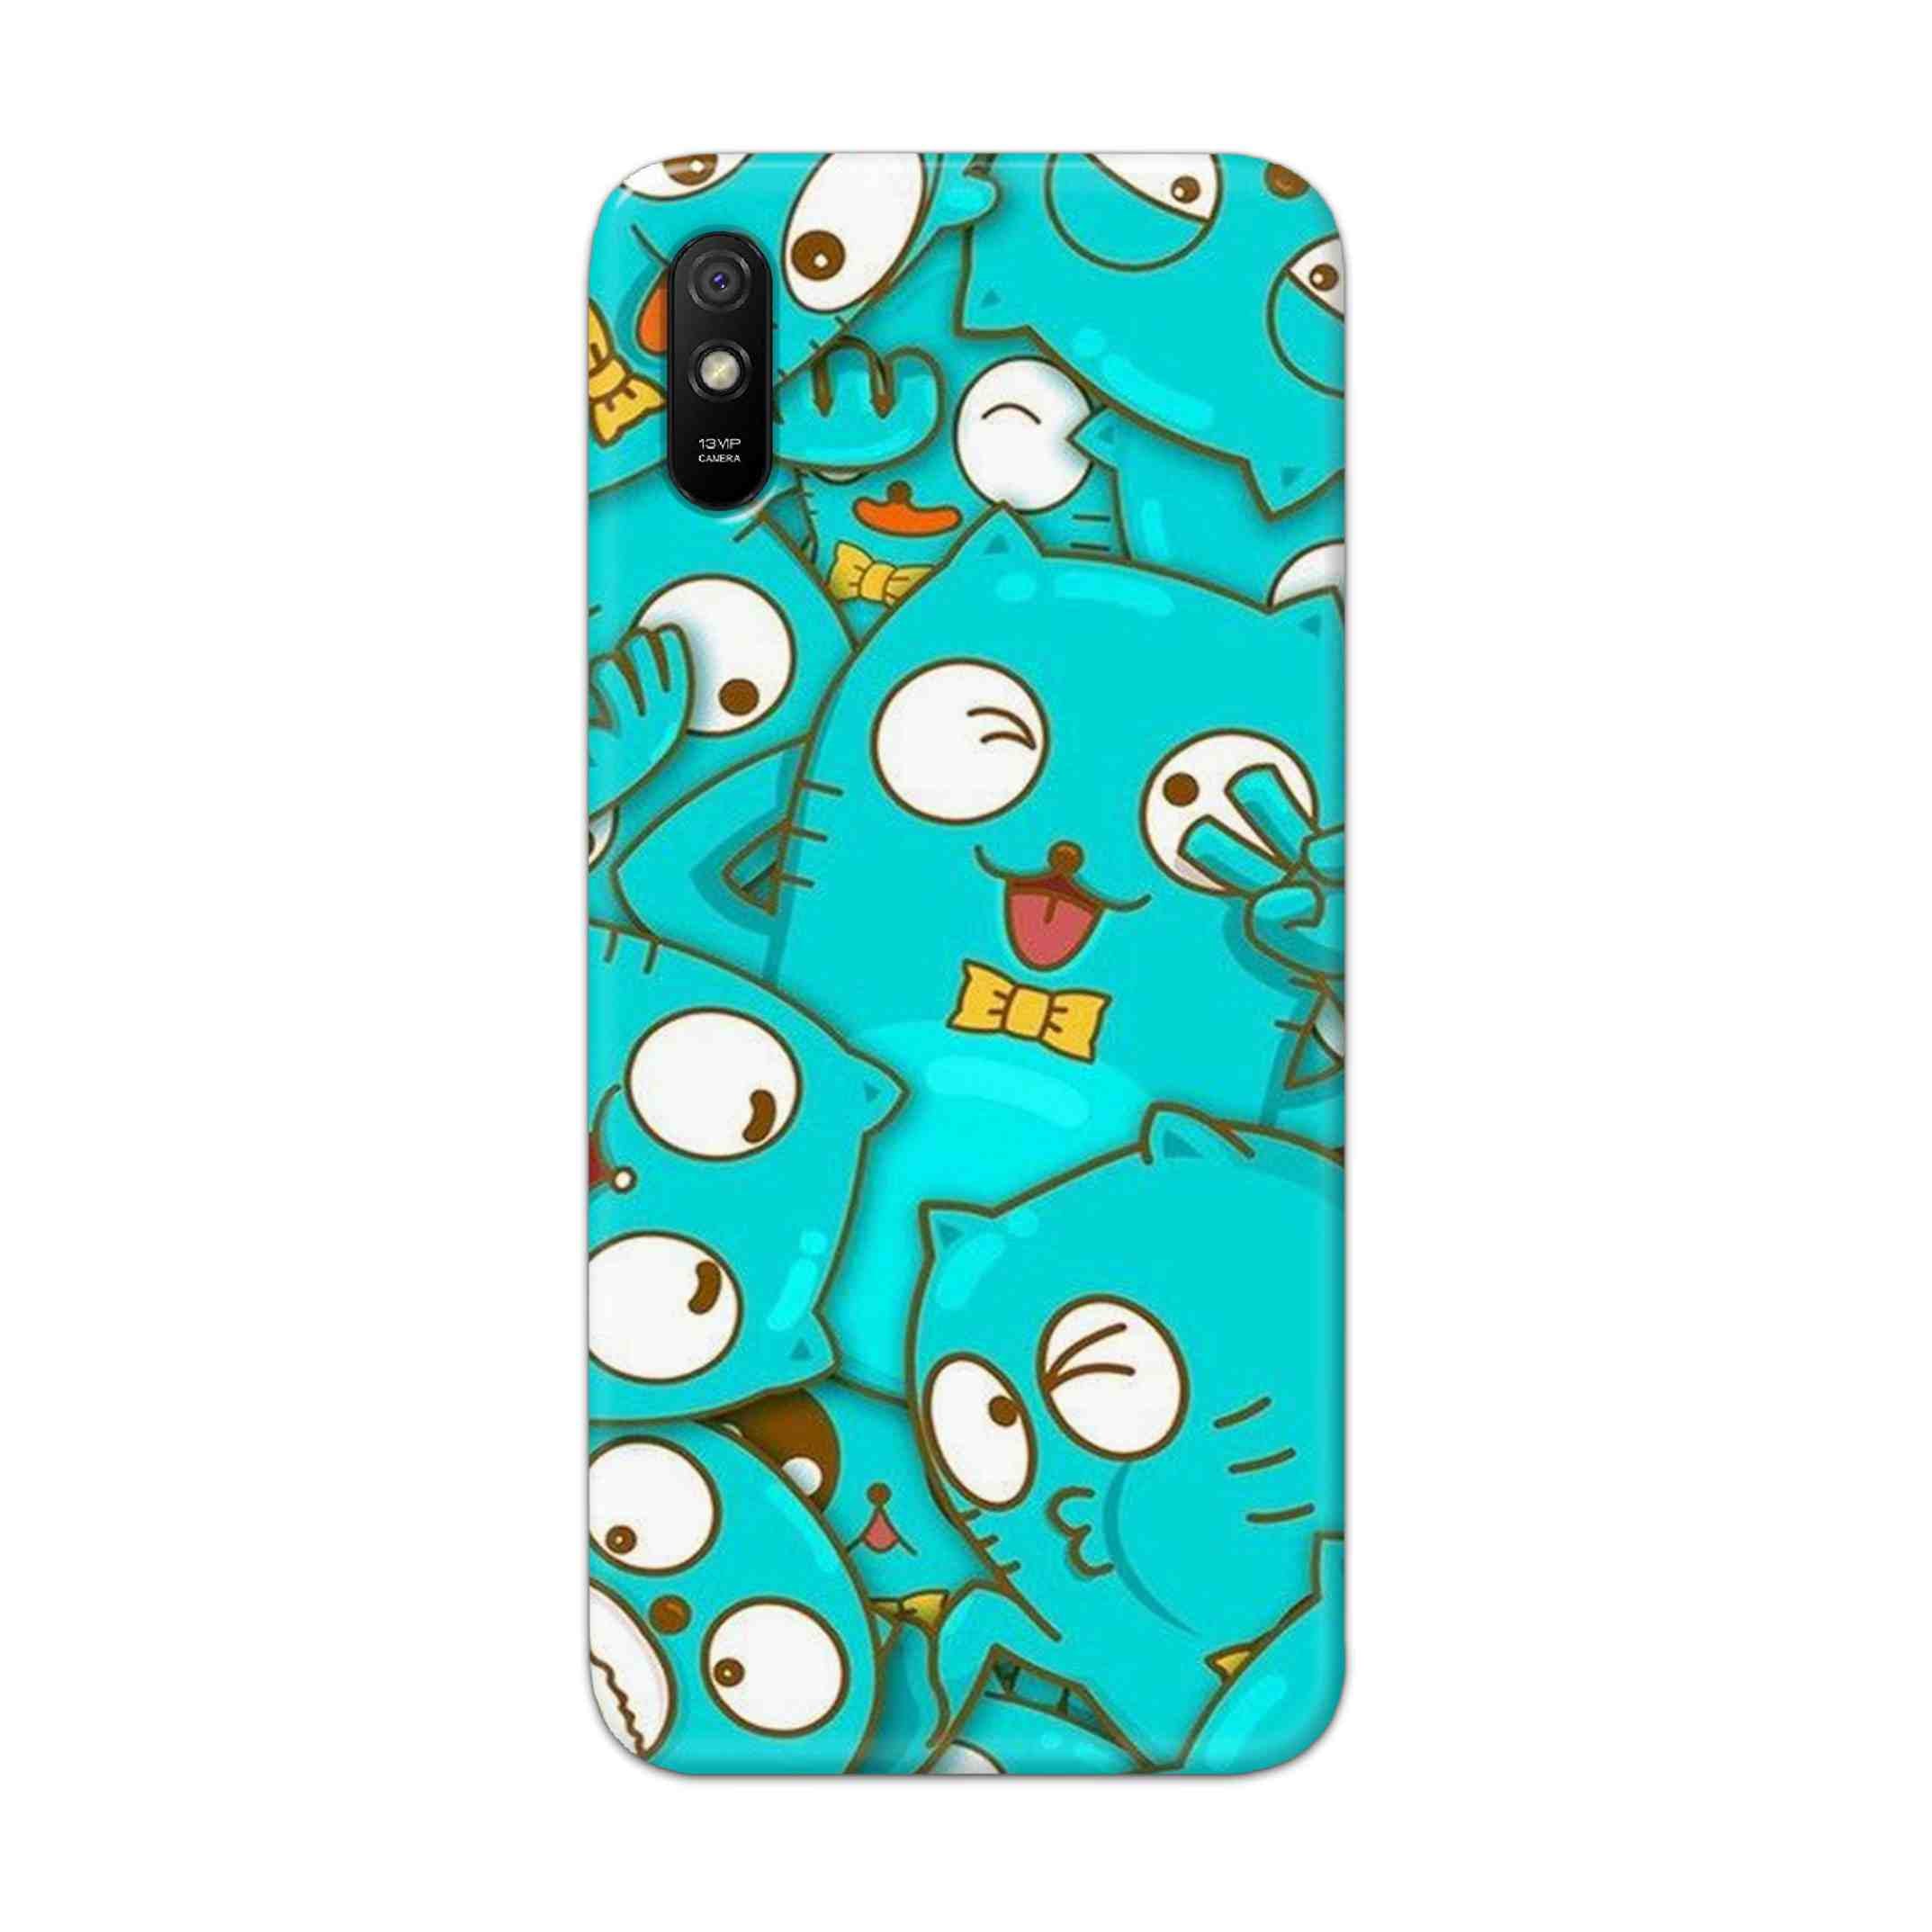 Buy Cat Hard Back Mobile Phone Case Cover For Redmi 9A Online